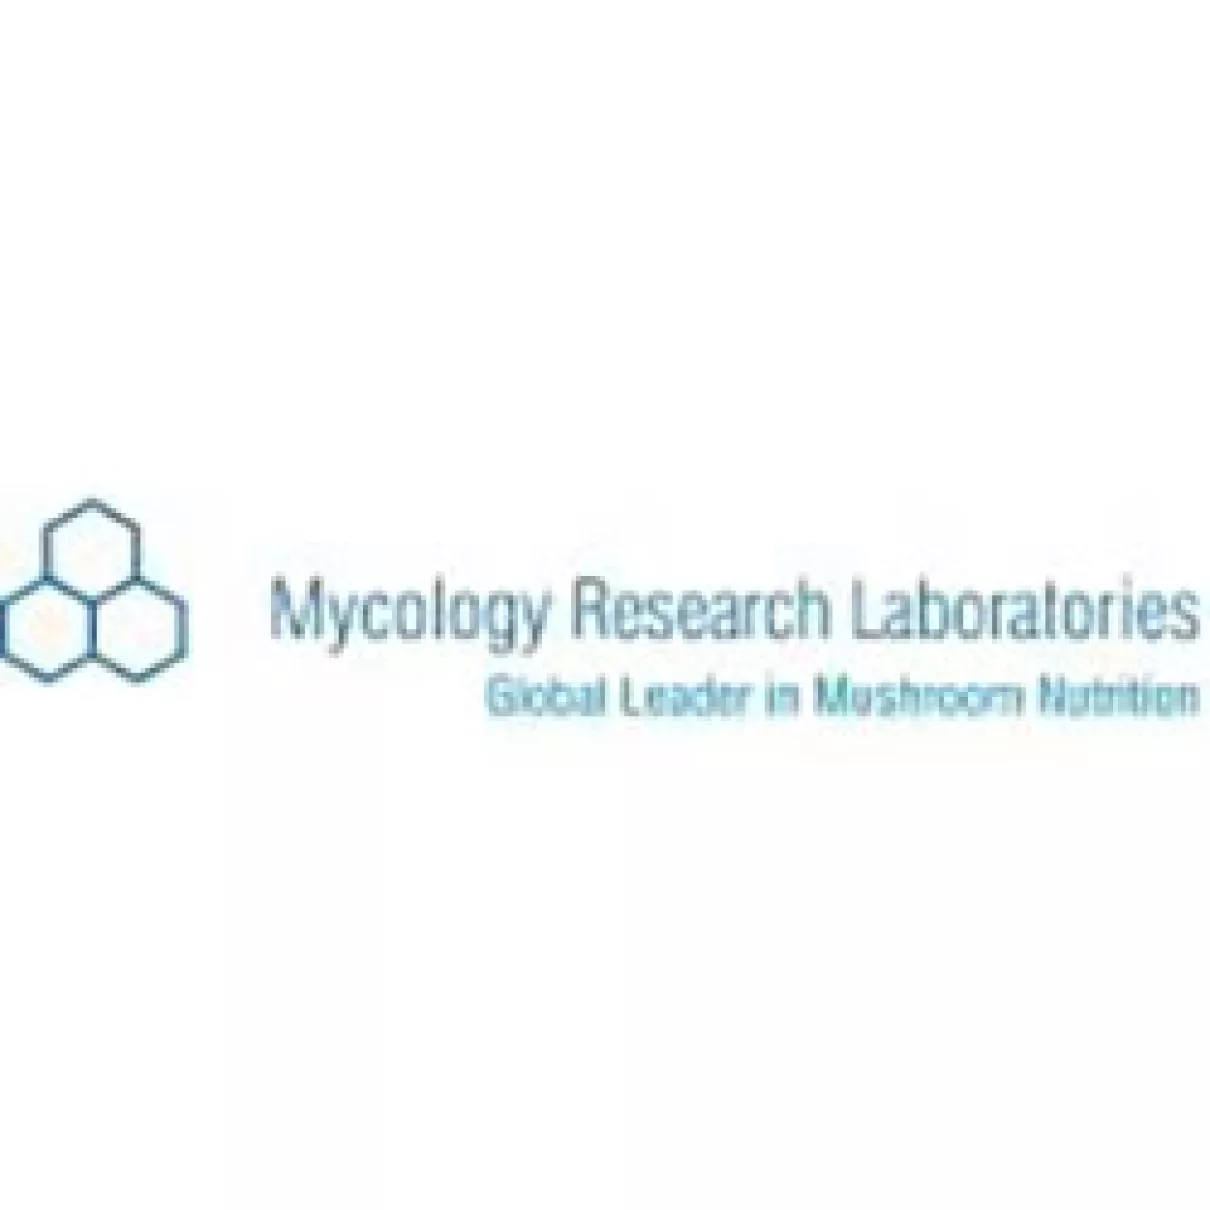 Mycology Research Laboratories